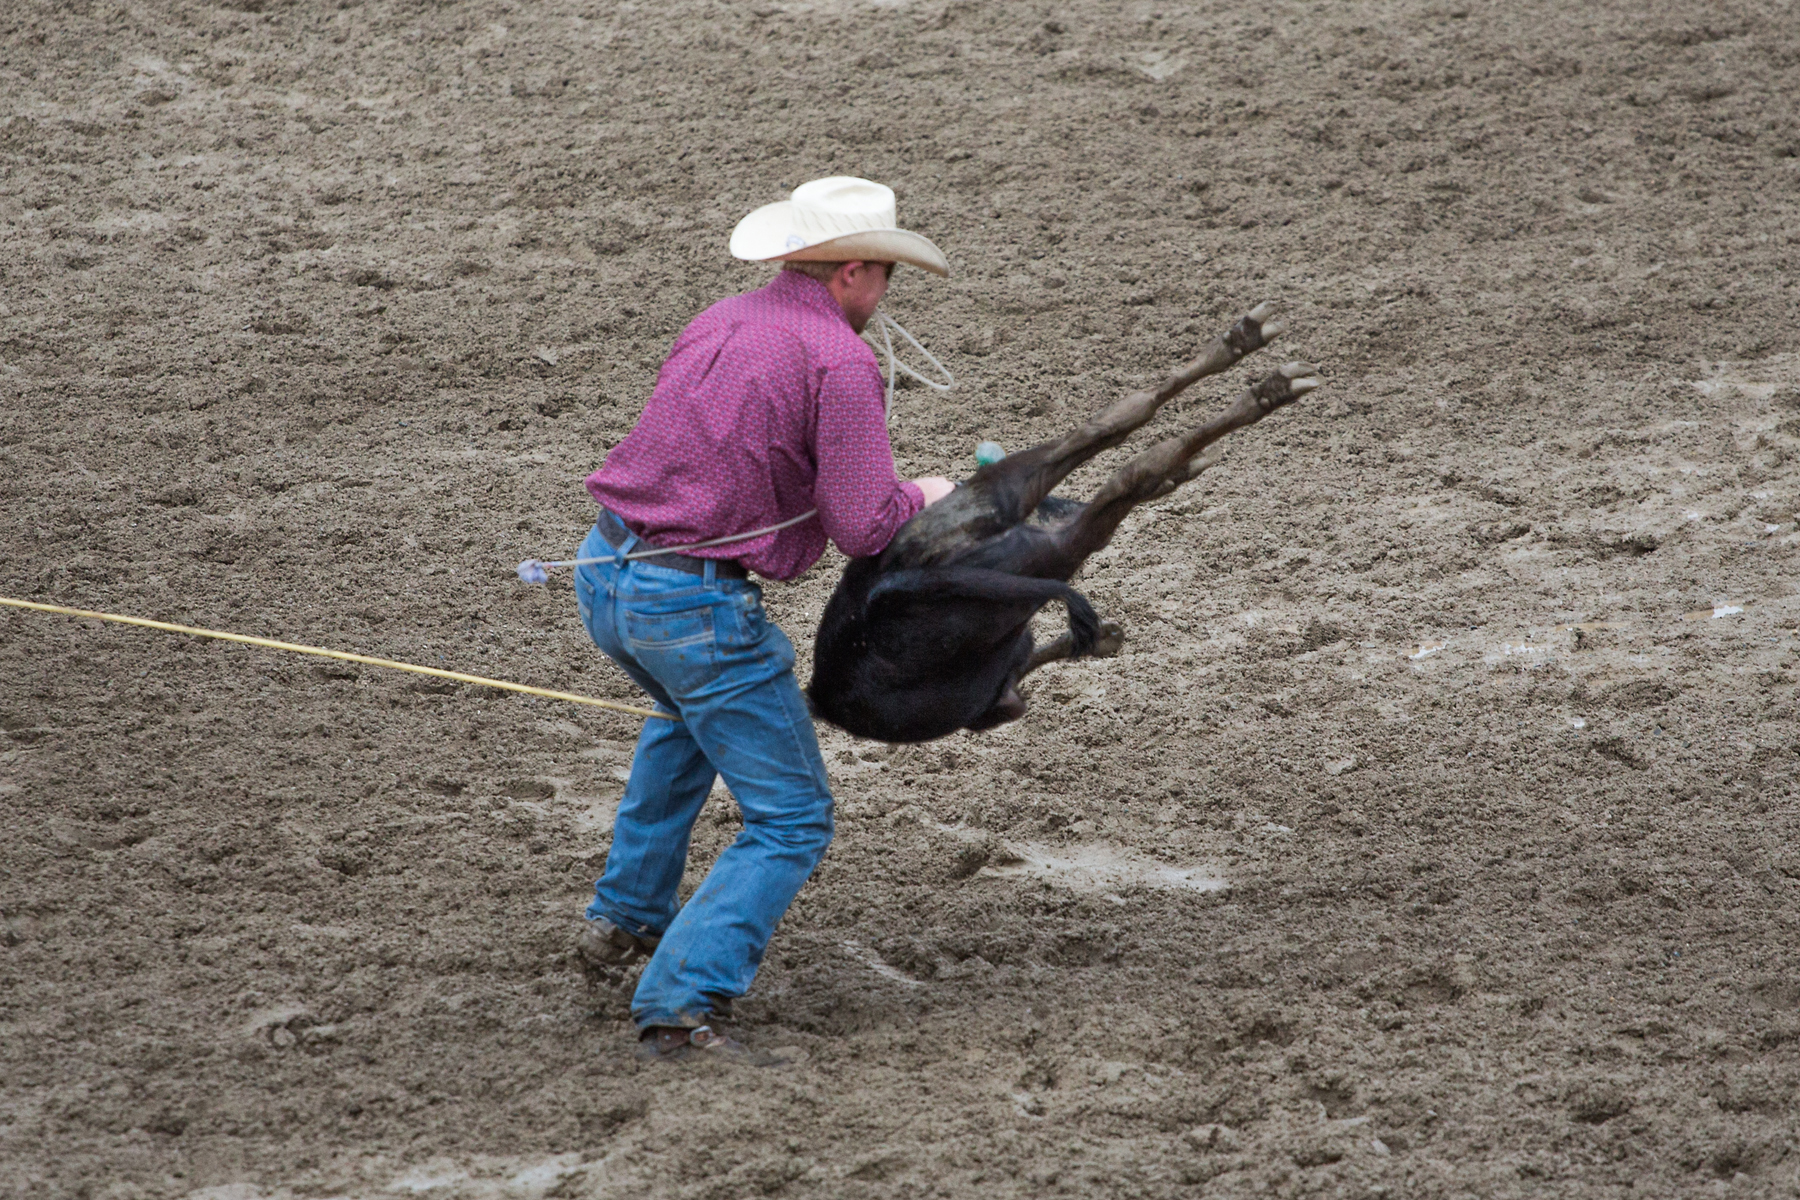 Calf roping at Home of Champions Rodeo, Red Lodge, MT, July 4, 2021.  Click for next photo.